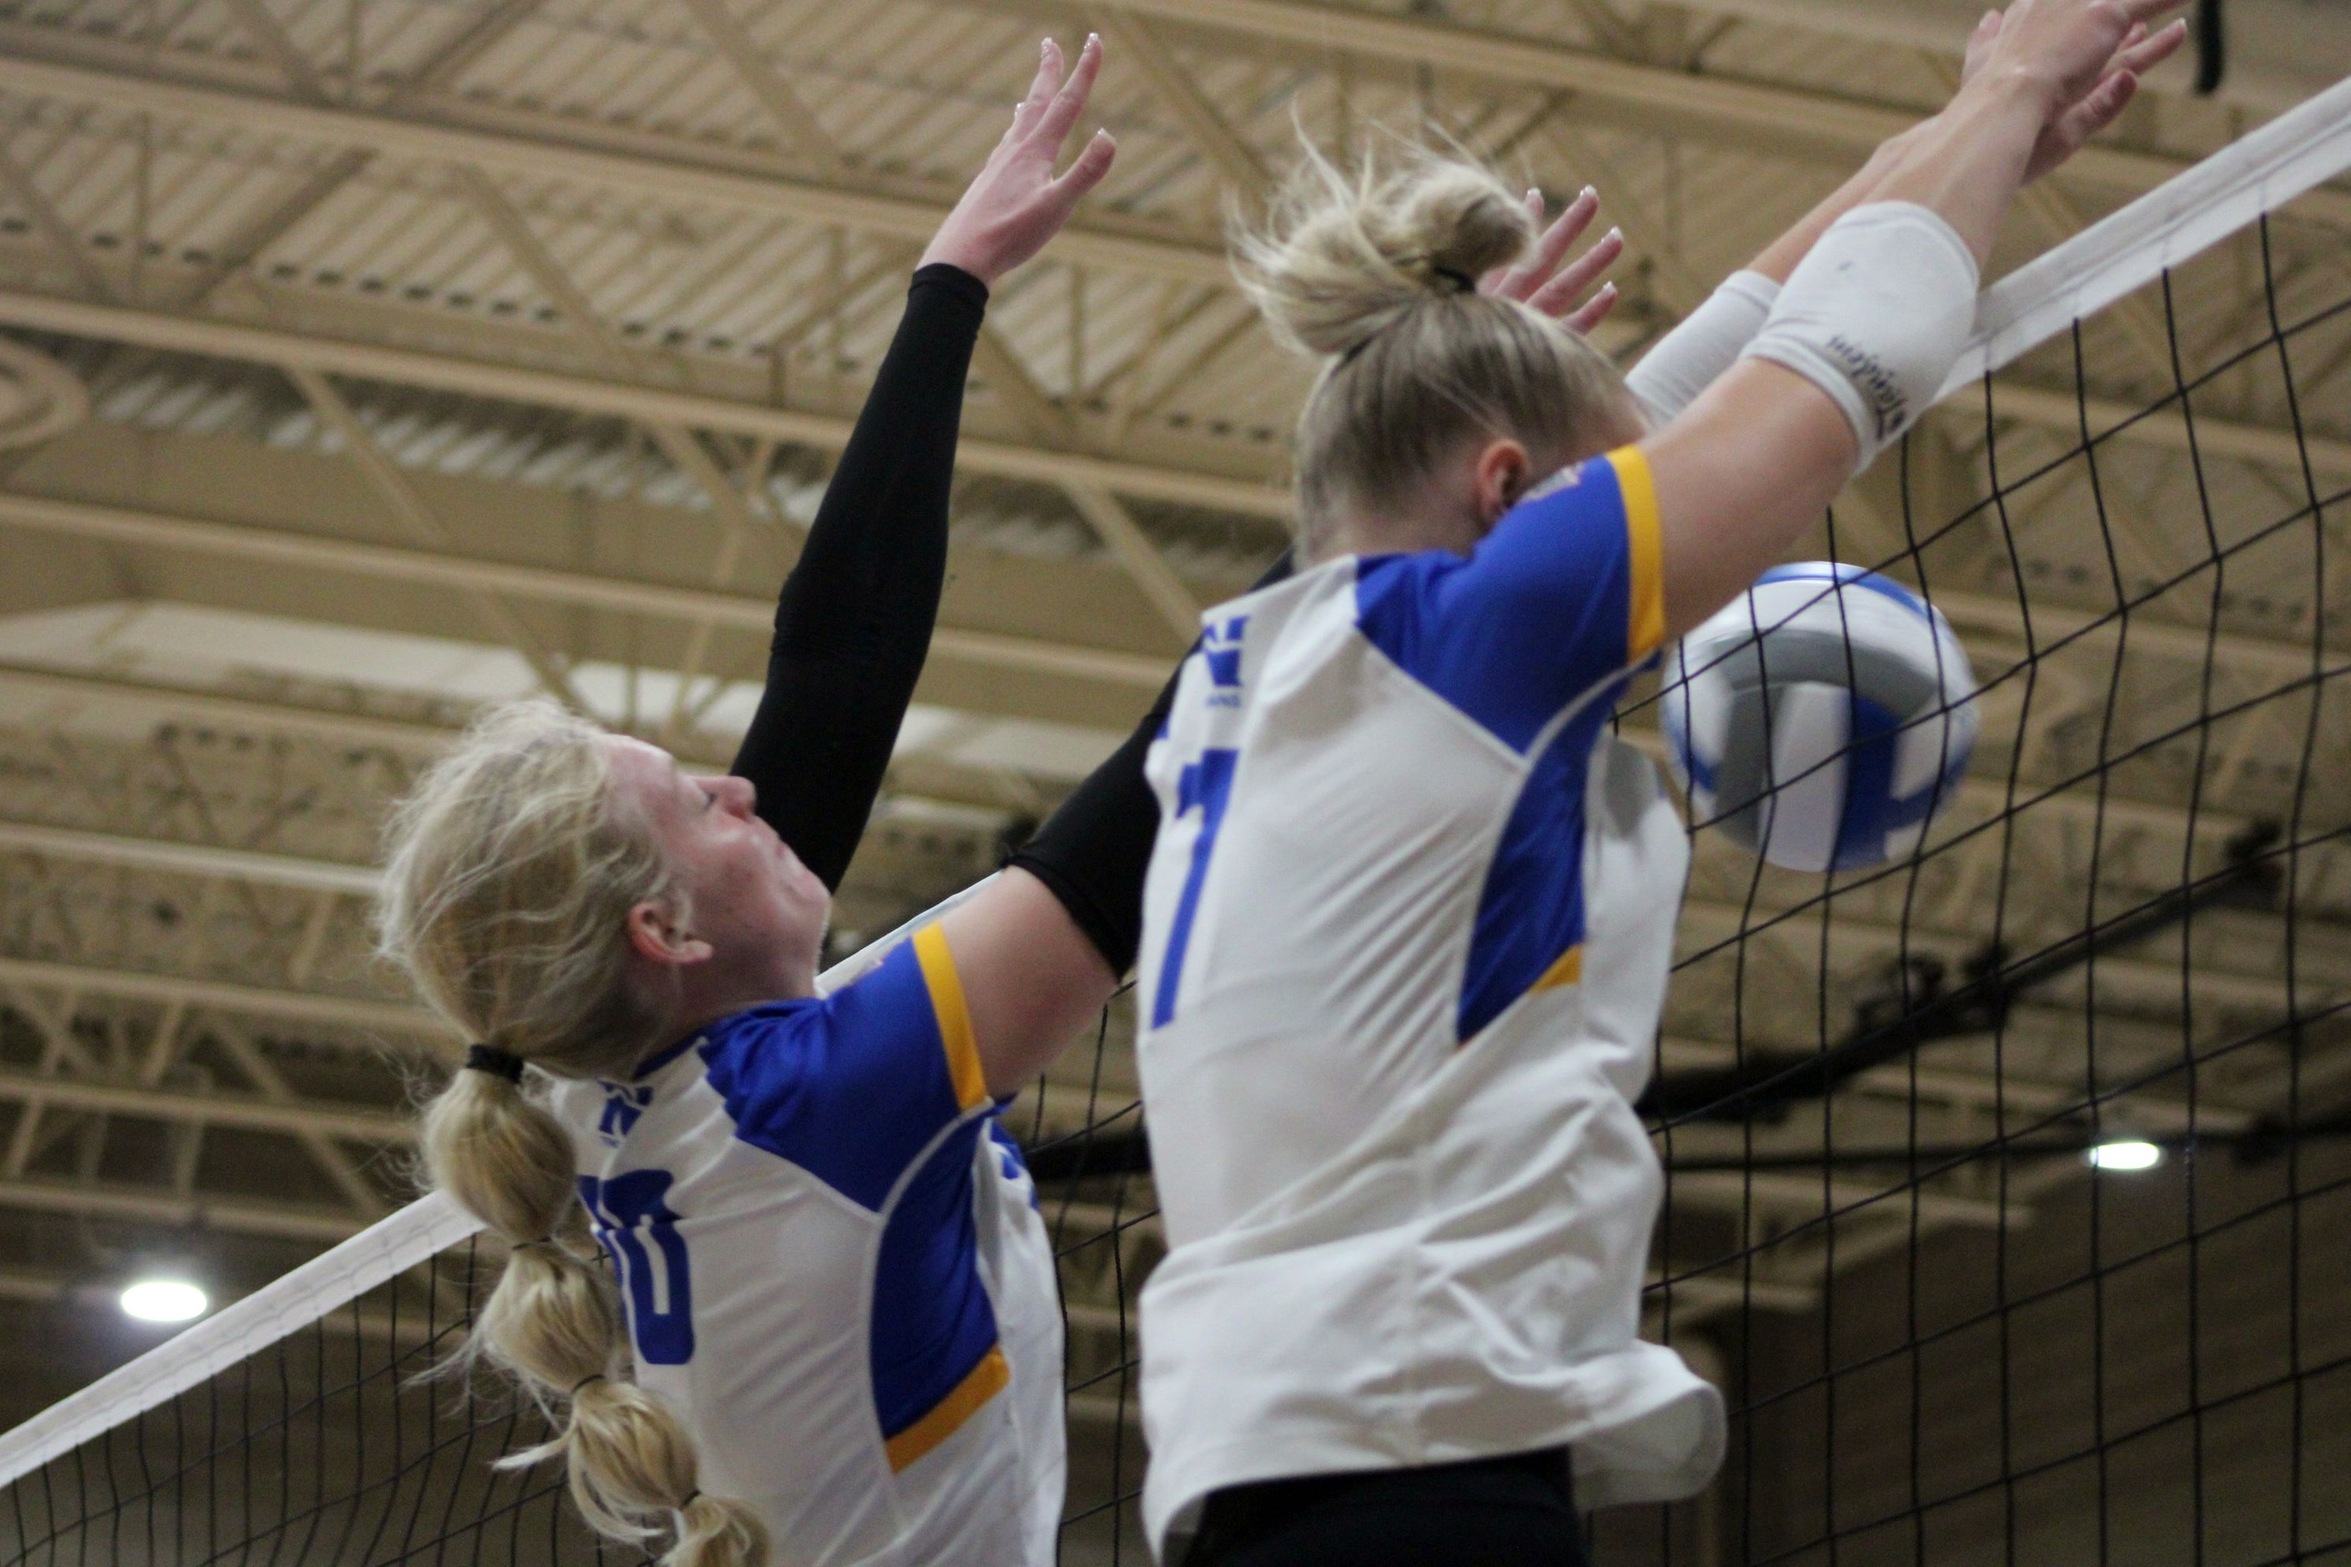 NIACC's Ellie Hanna (left) and Alicia Machacek team up for the block in Saturday's match against Ellsworth.